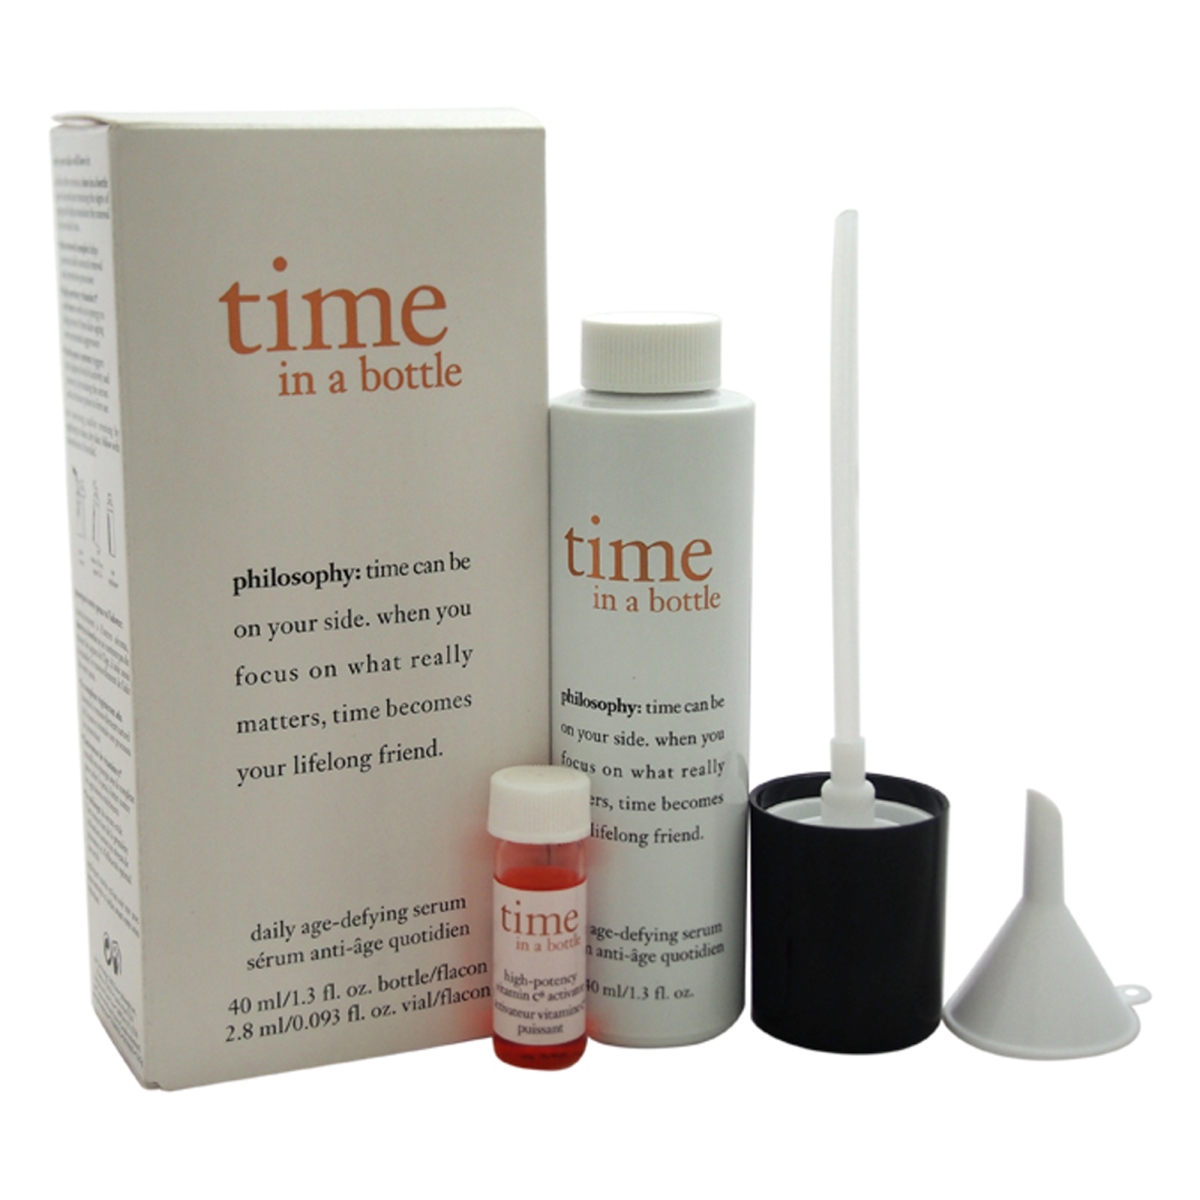 W-sc-2536 Time In A Bottle Daily Age-defying Serum For Women - 2 Piece